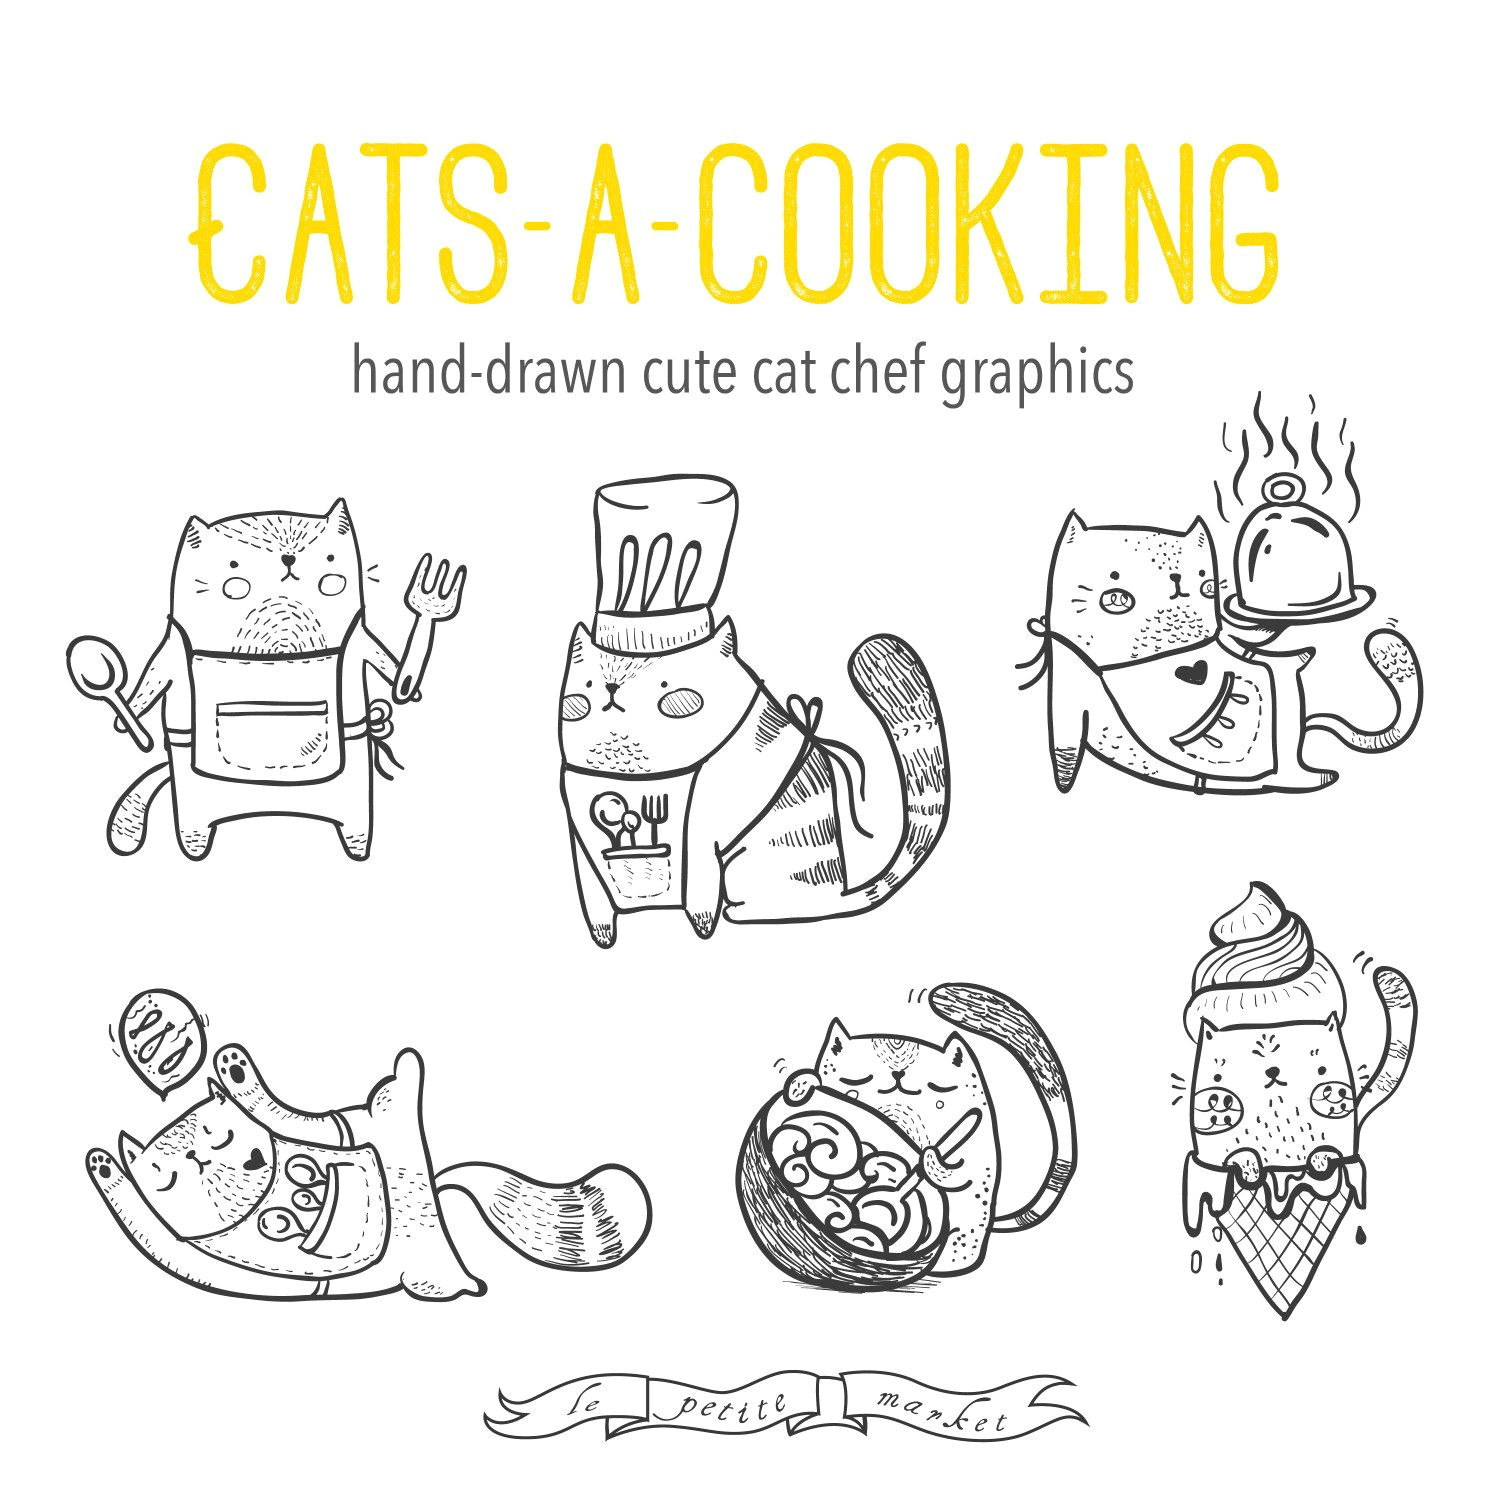 Hand Drawing Of A Cat Hand Drawn Cute Cats Cooking Baking Adorable Kitten Clip Art Baking